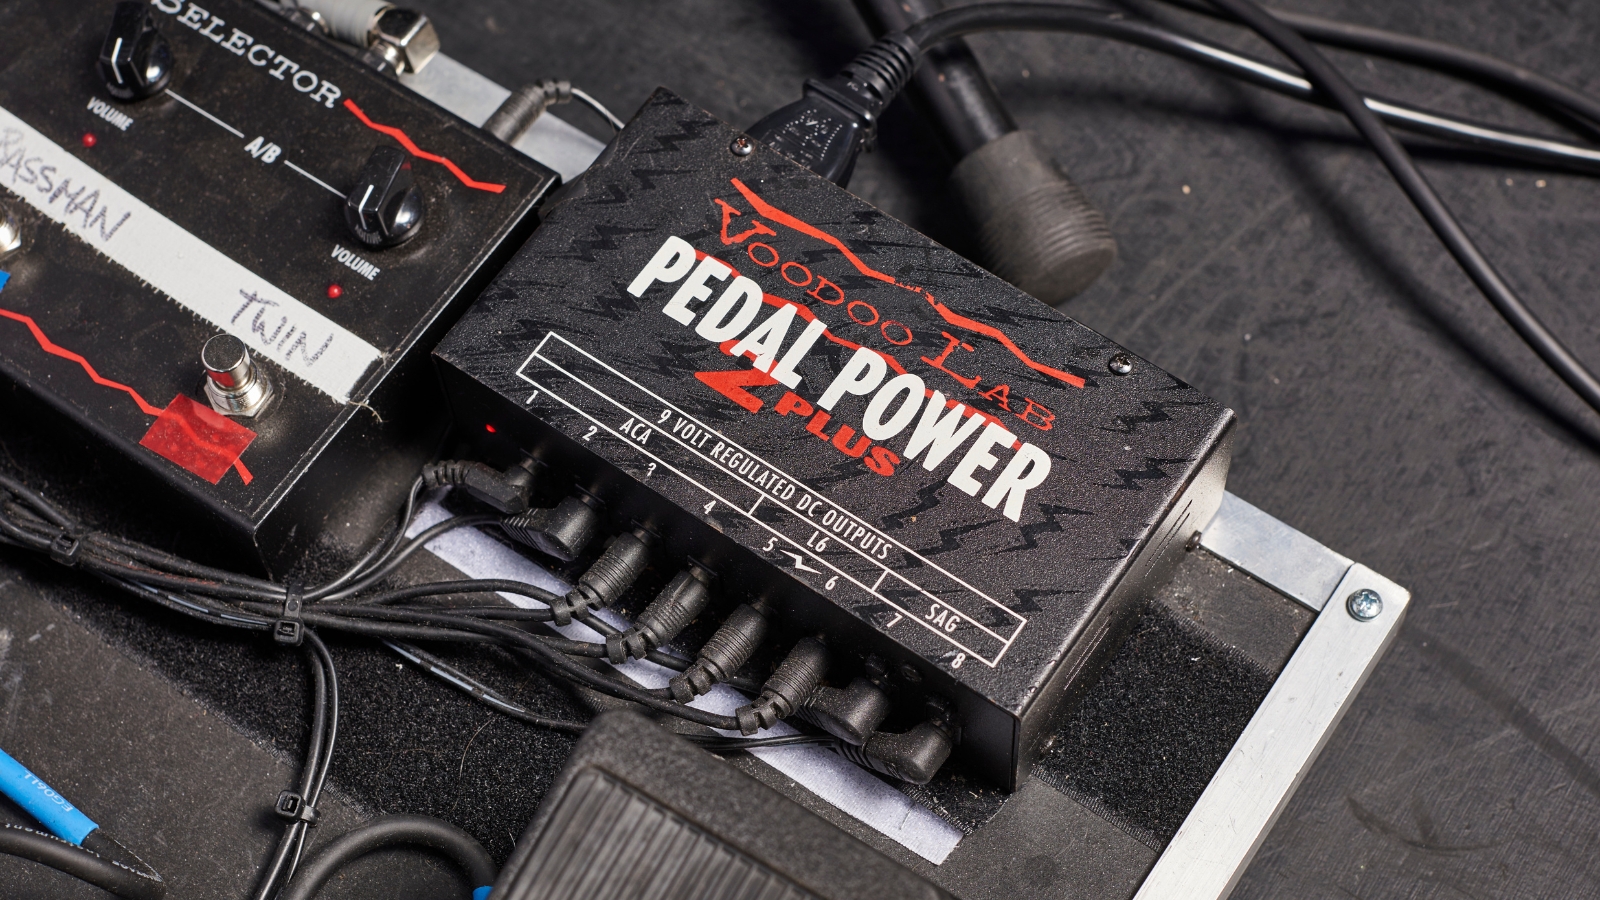 Fender Engine Room LVL 8 and LVL 12 Power Supply Unboxing 